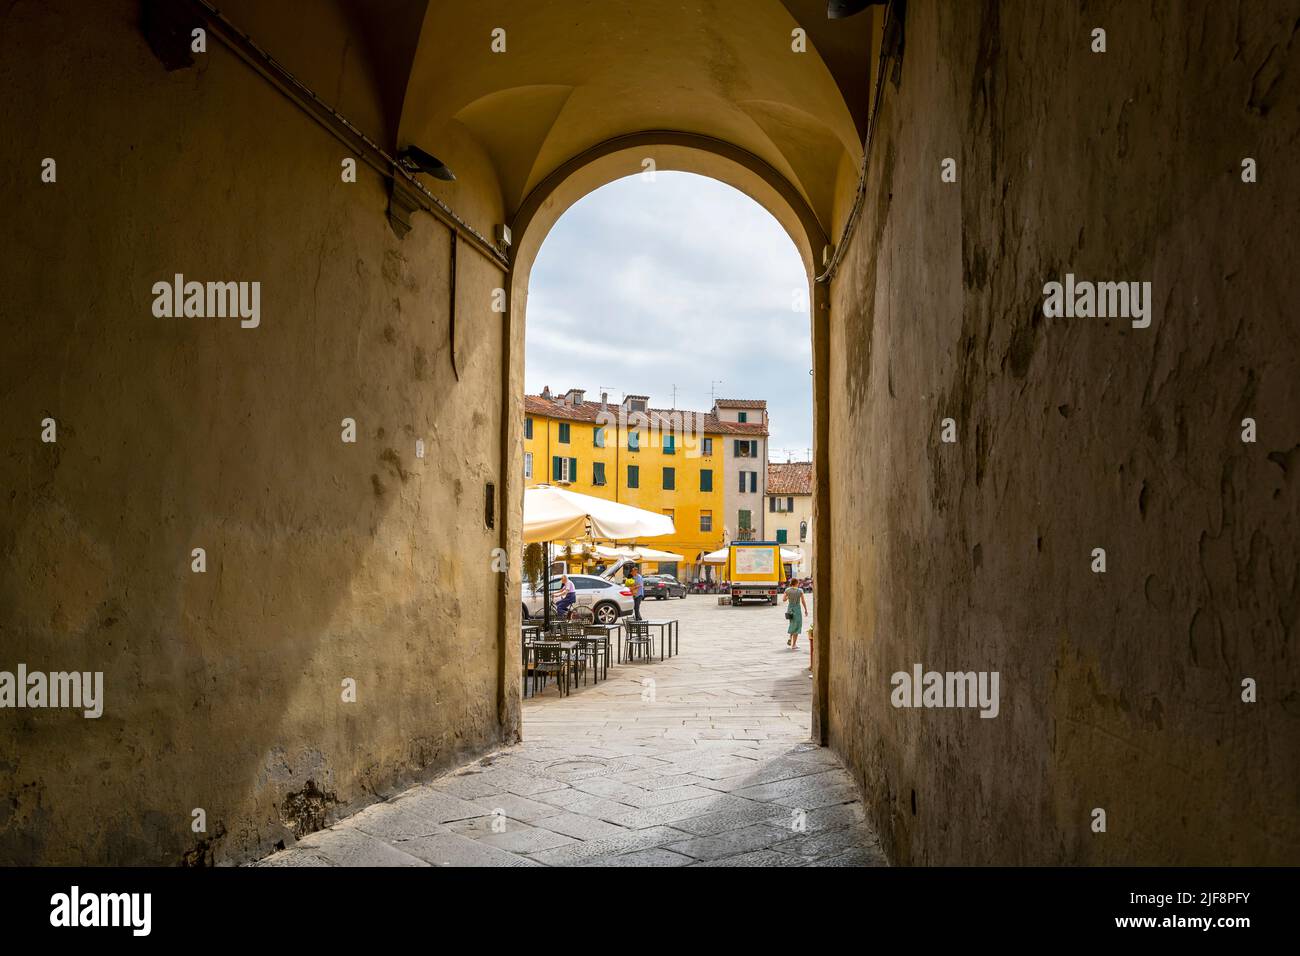 An arched tunneled entry into the ancient amphitheater, now Piazza del Anfiteatro in Lucca Italy, with cafes and shops. Stock Photo